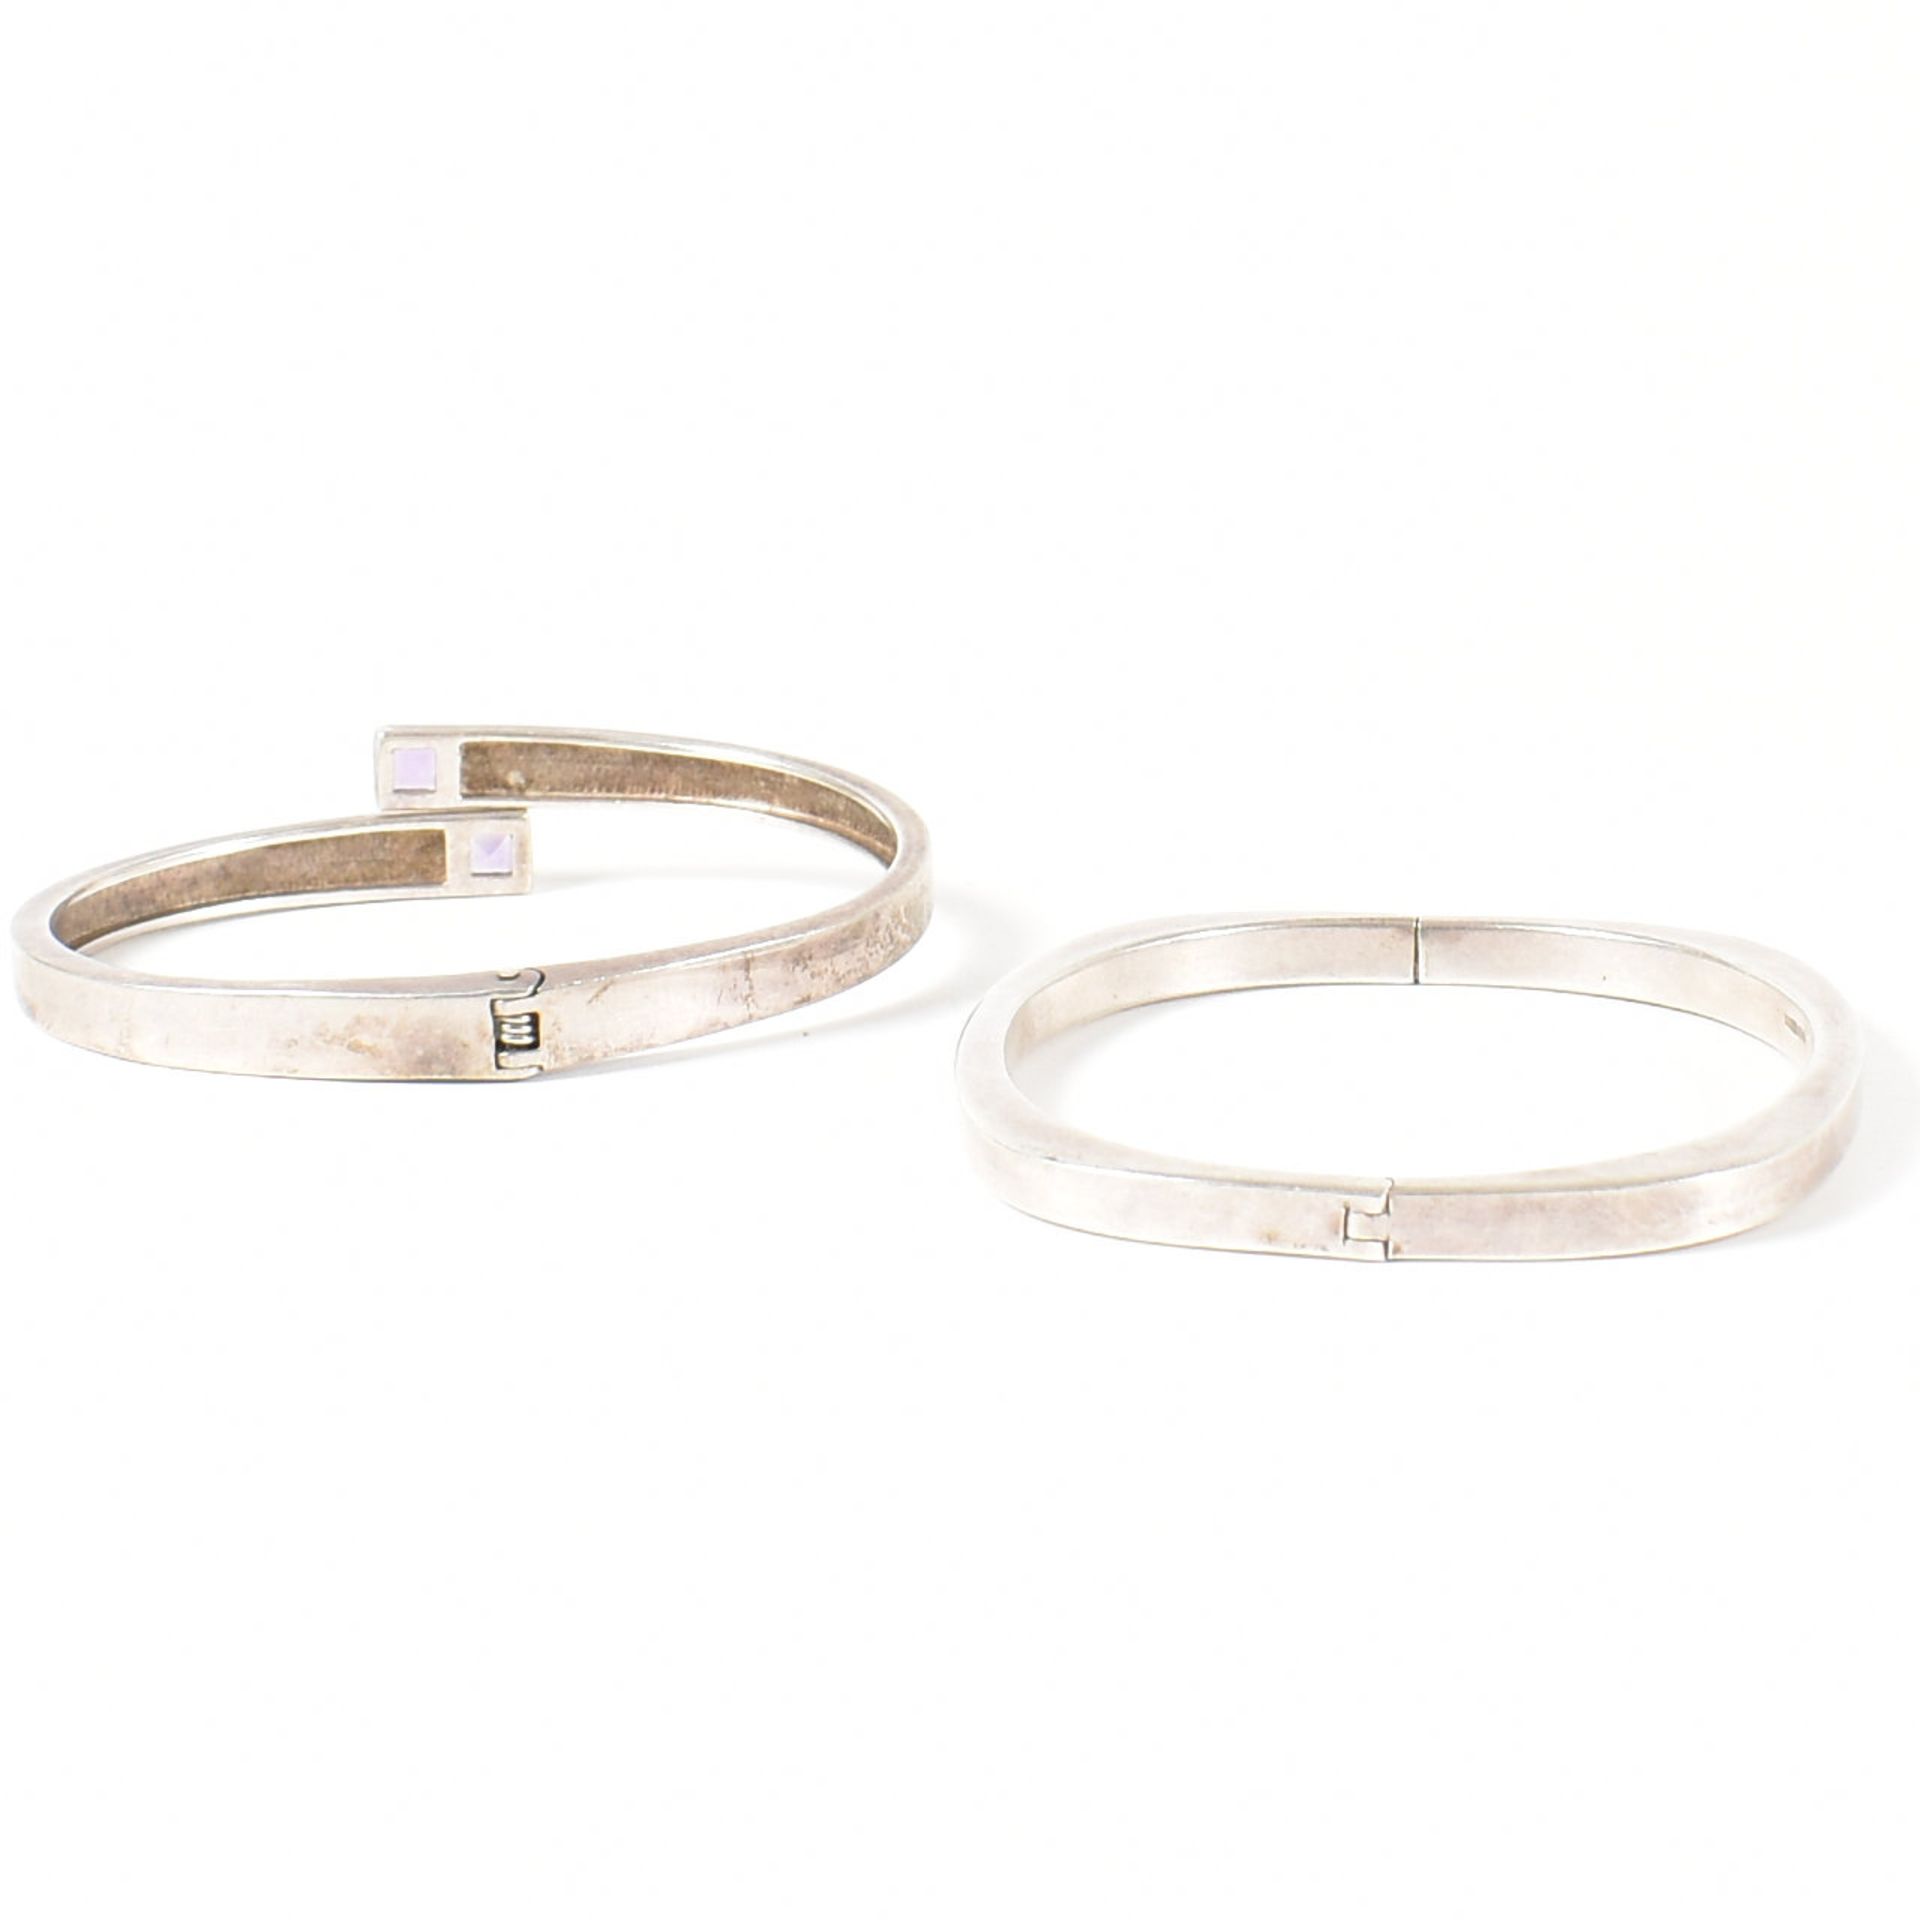 TWO HALLMARKED 925 SILVER BANGLES - Image 2 of 5